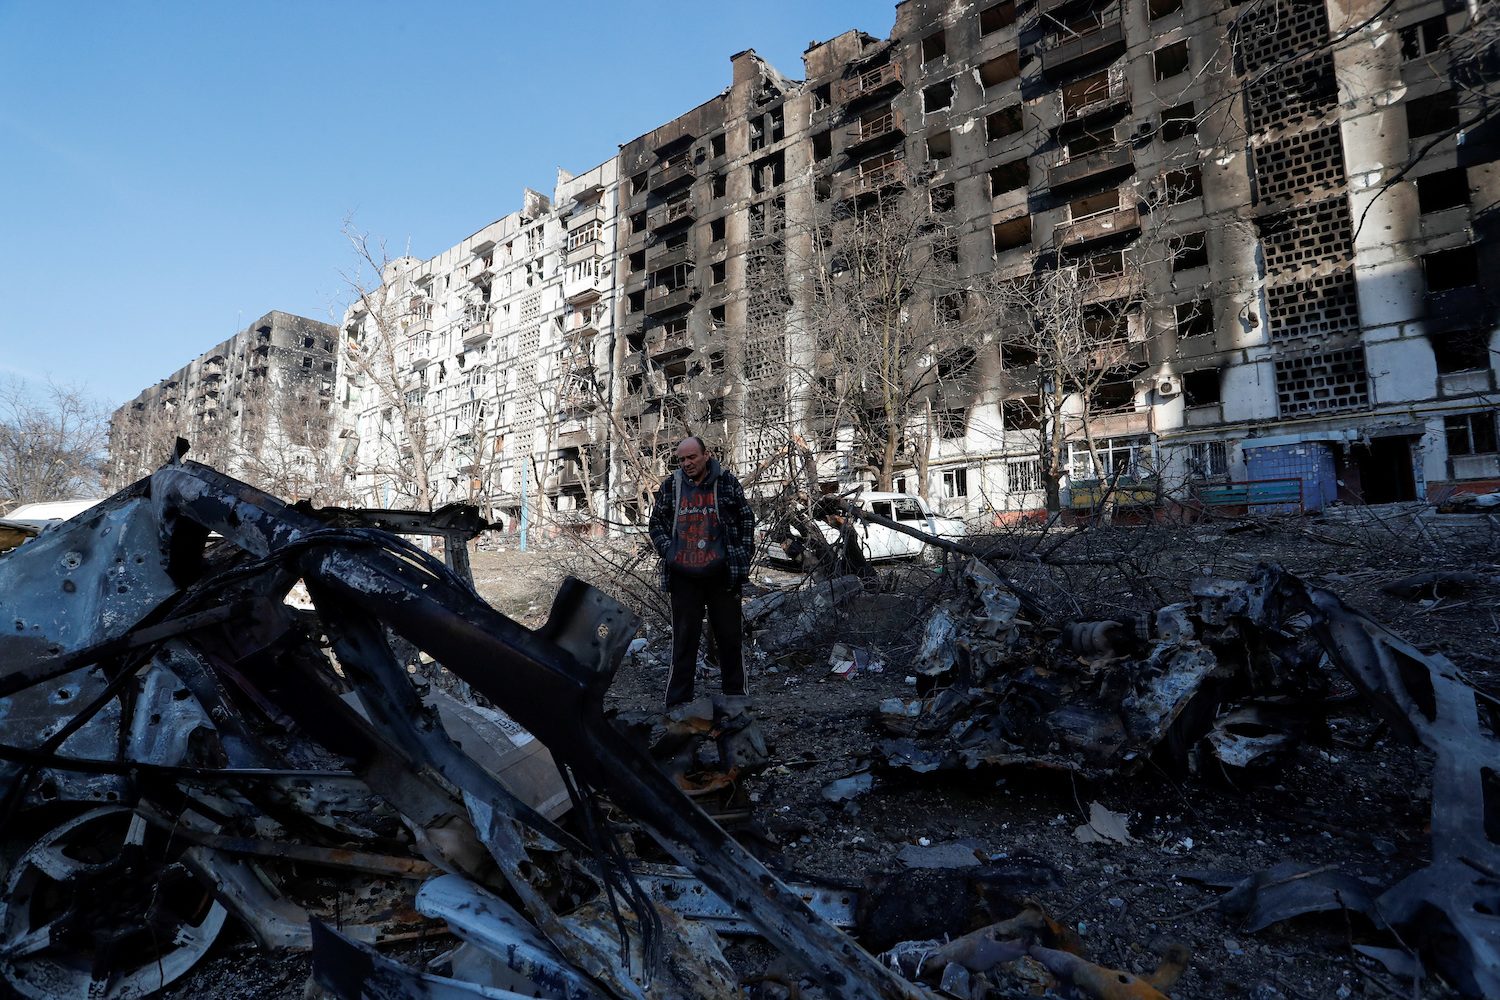 Associated Press, New York Times win Pulitzers for Ukraine coverage